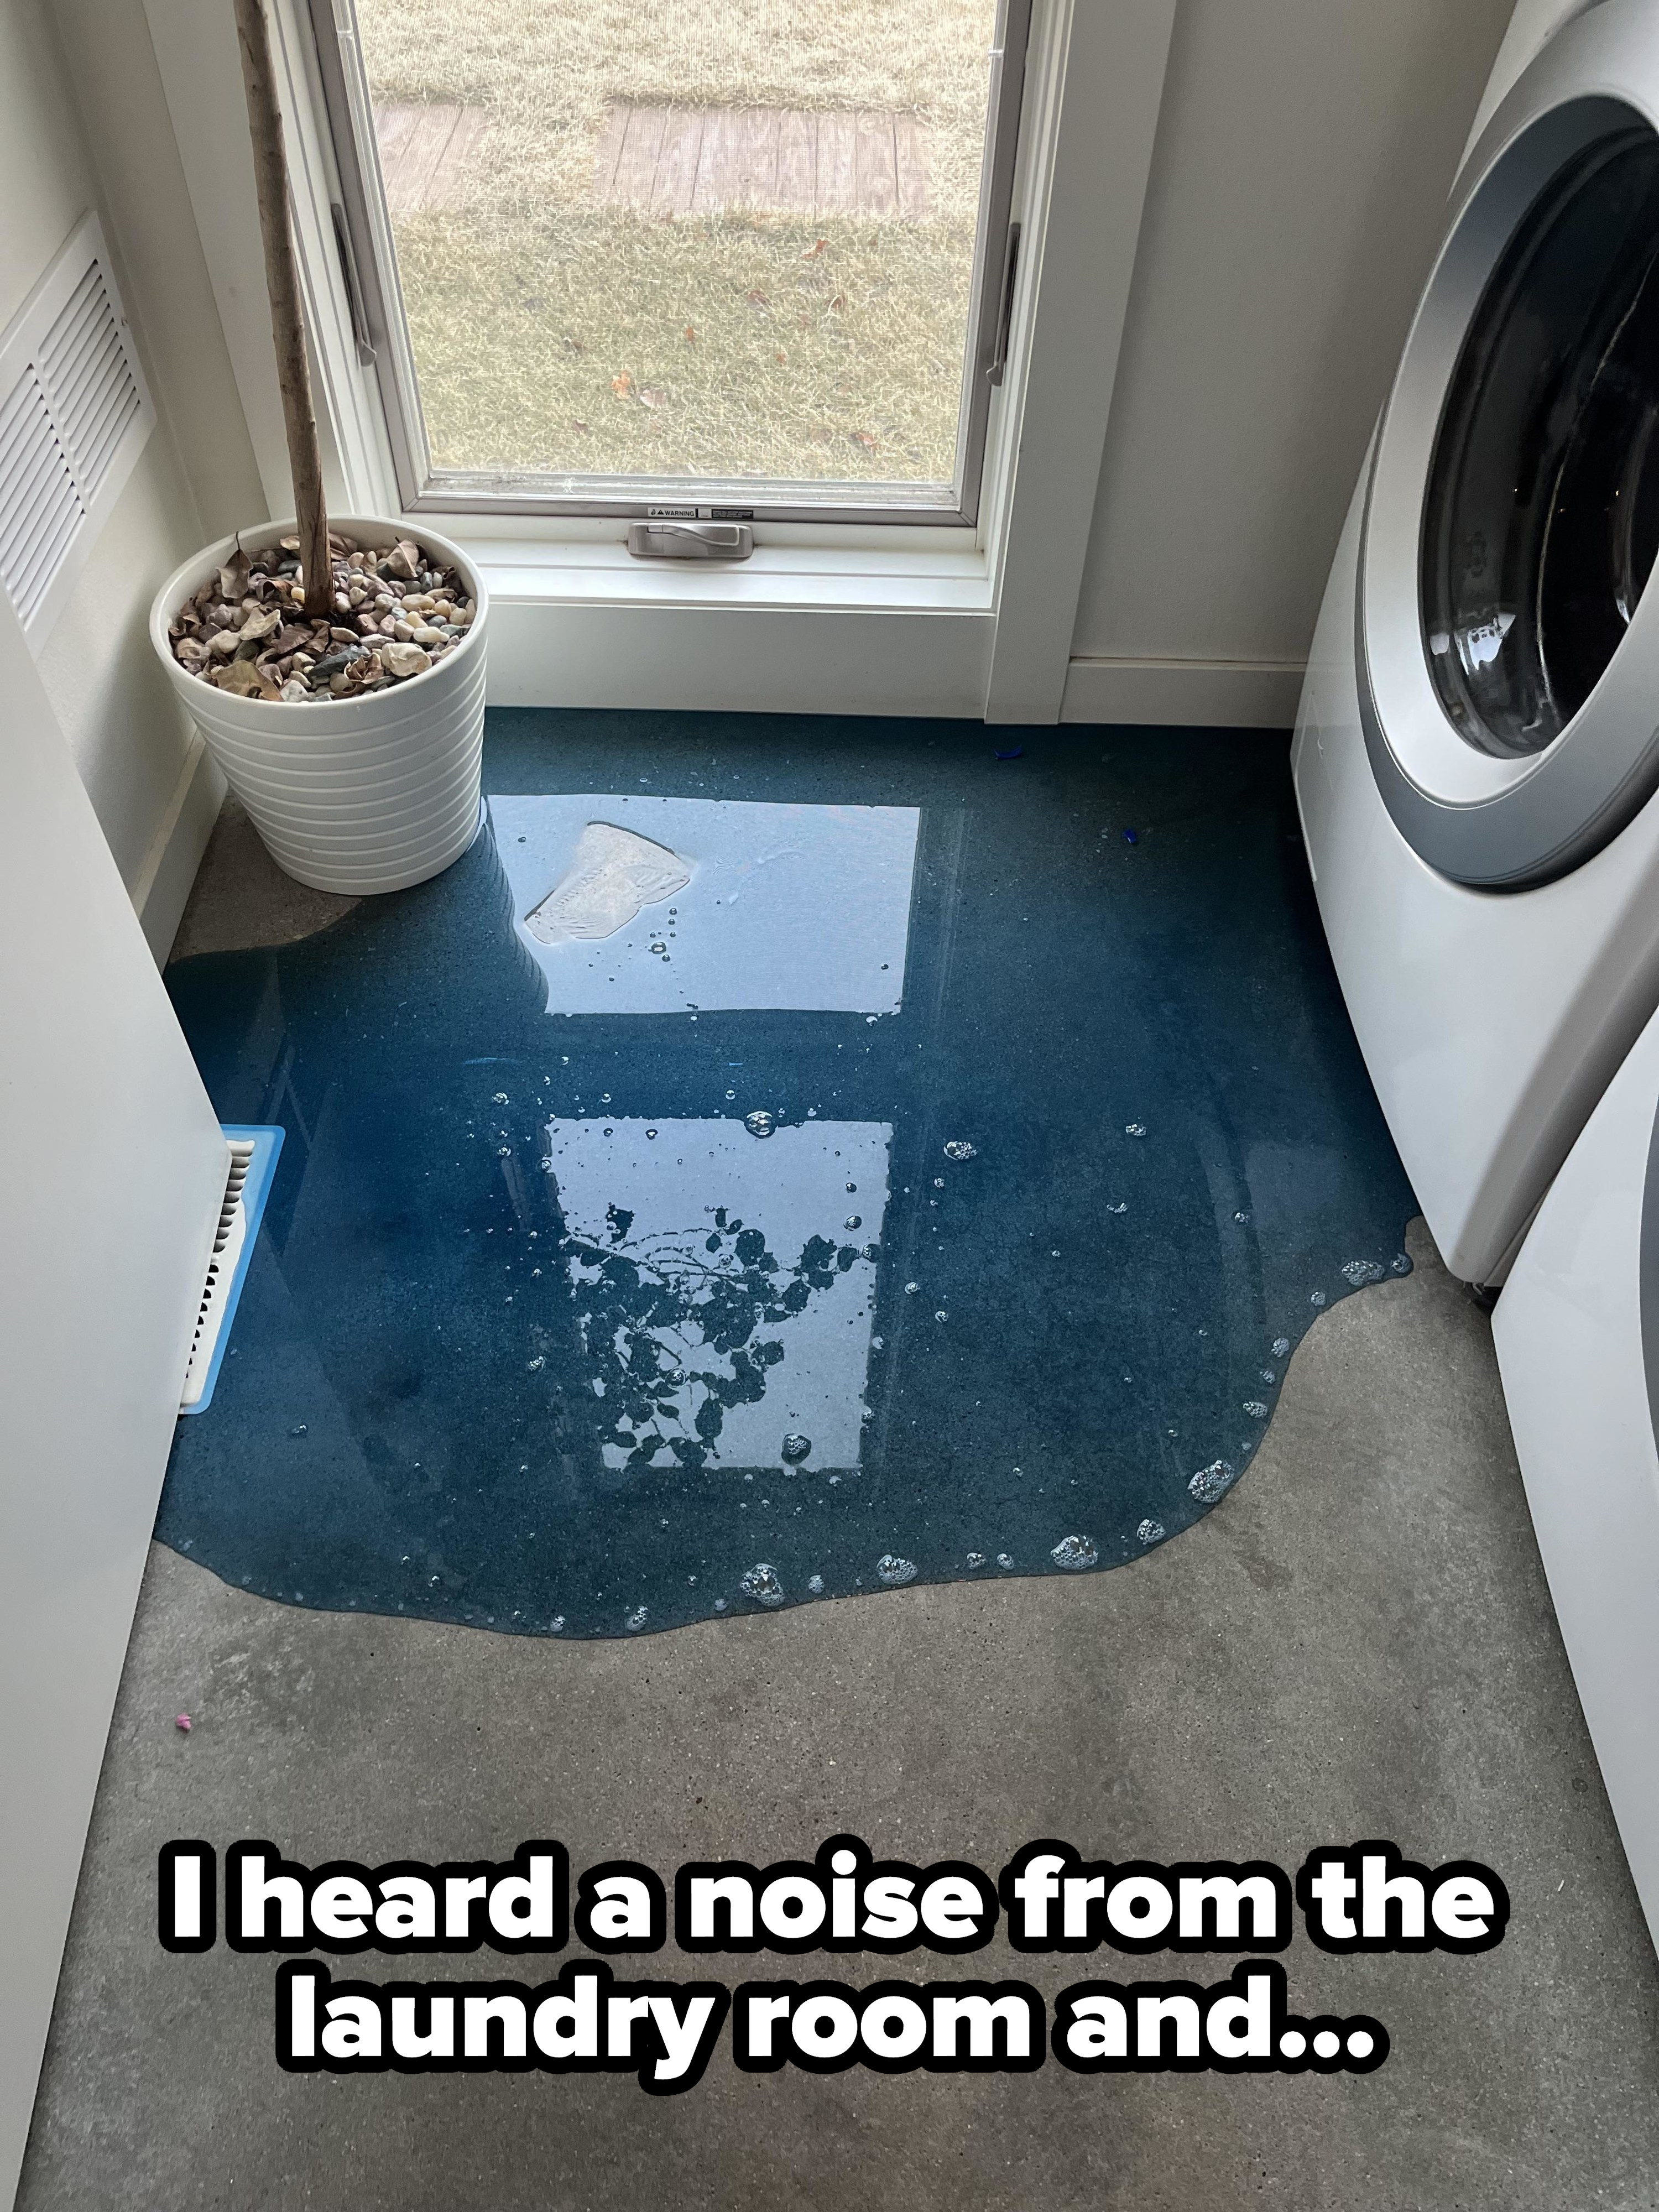 &quot;I heard a noise from the laundry room and&quot; caption with lots of blue liquid laundry detergent on the floor next to a washing machine